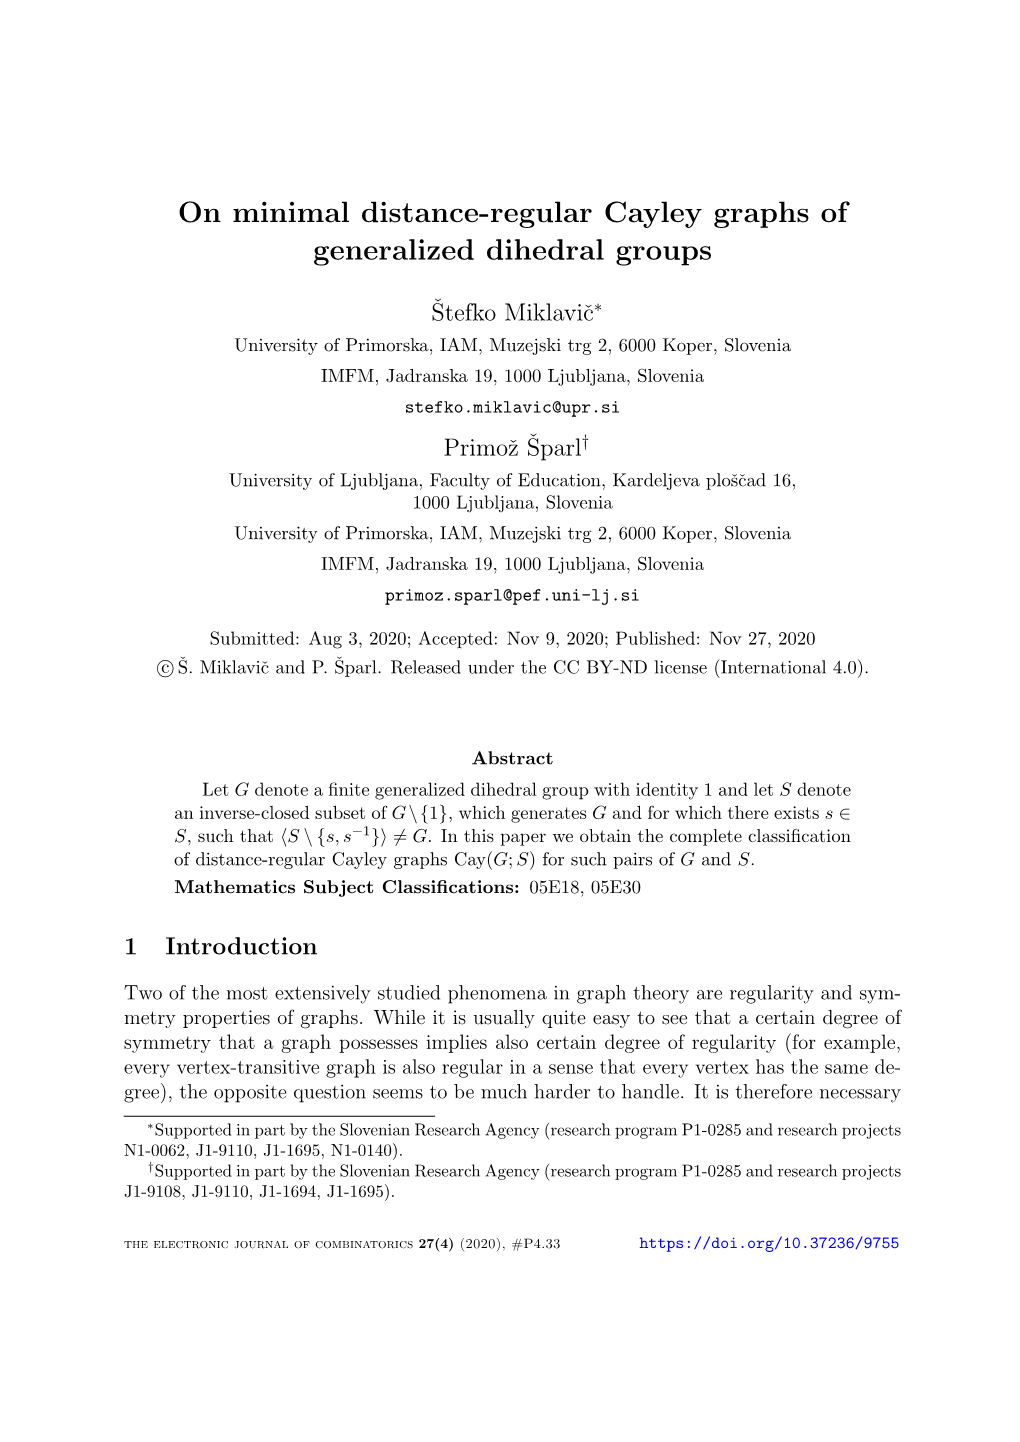 On Minimal Distance-Regular Cayley Graphs of Generalized Dihedral Groups